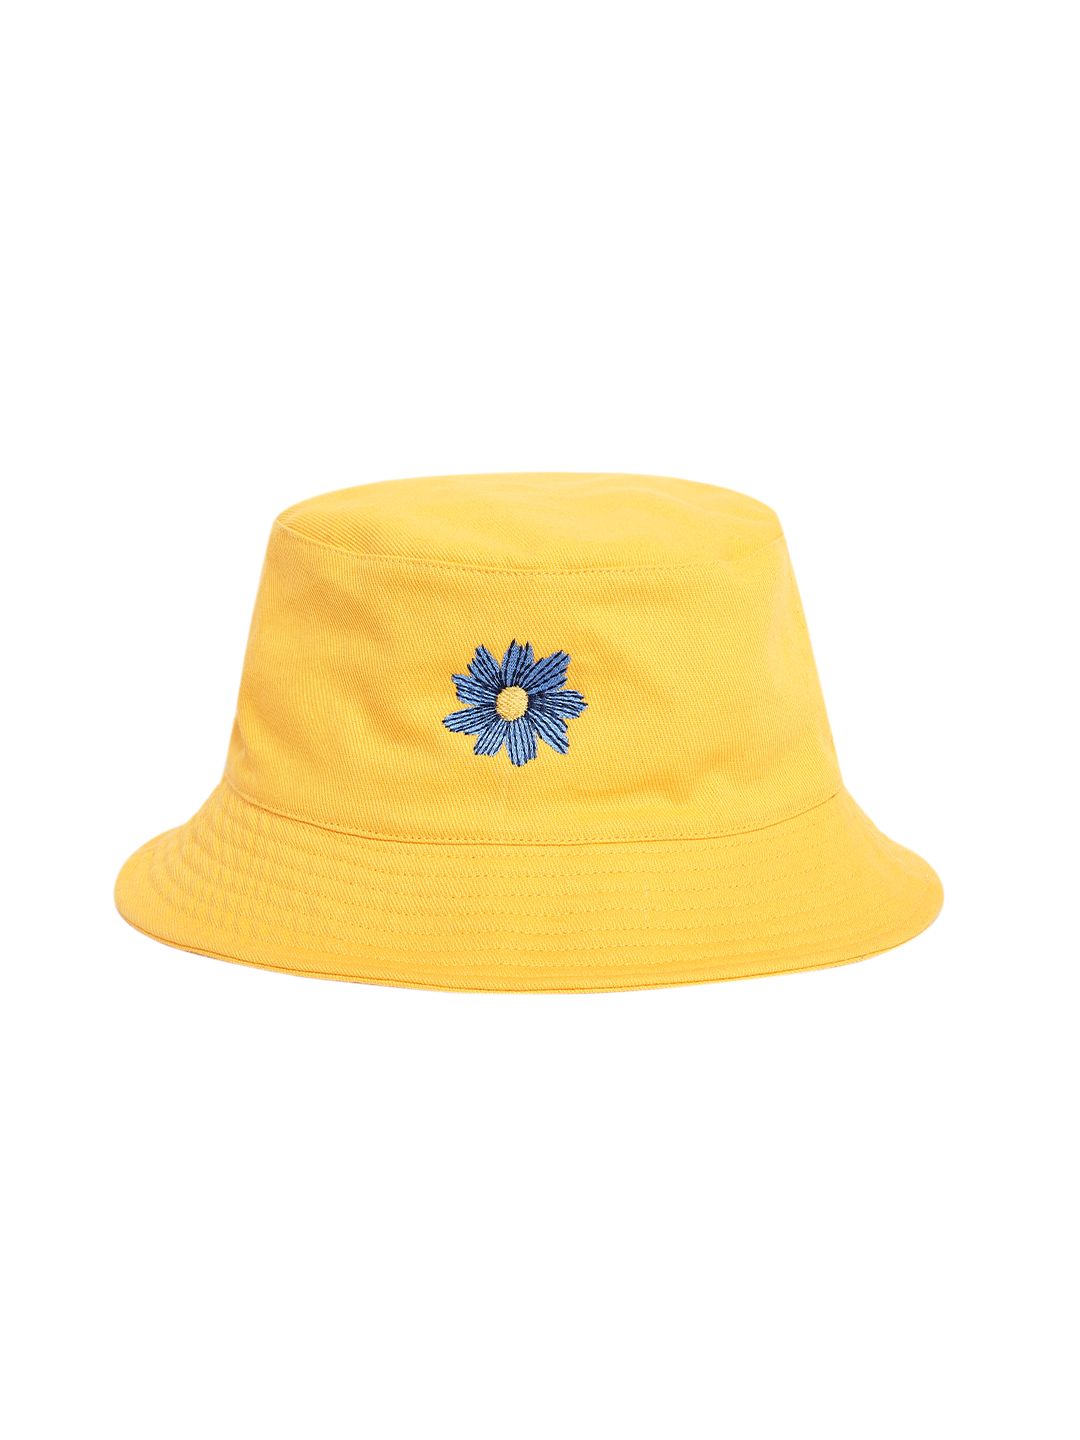 Blueberry Unisex Yellow & Blue Floral Embroidered Reversible Bucket Hat Price in India